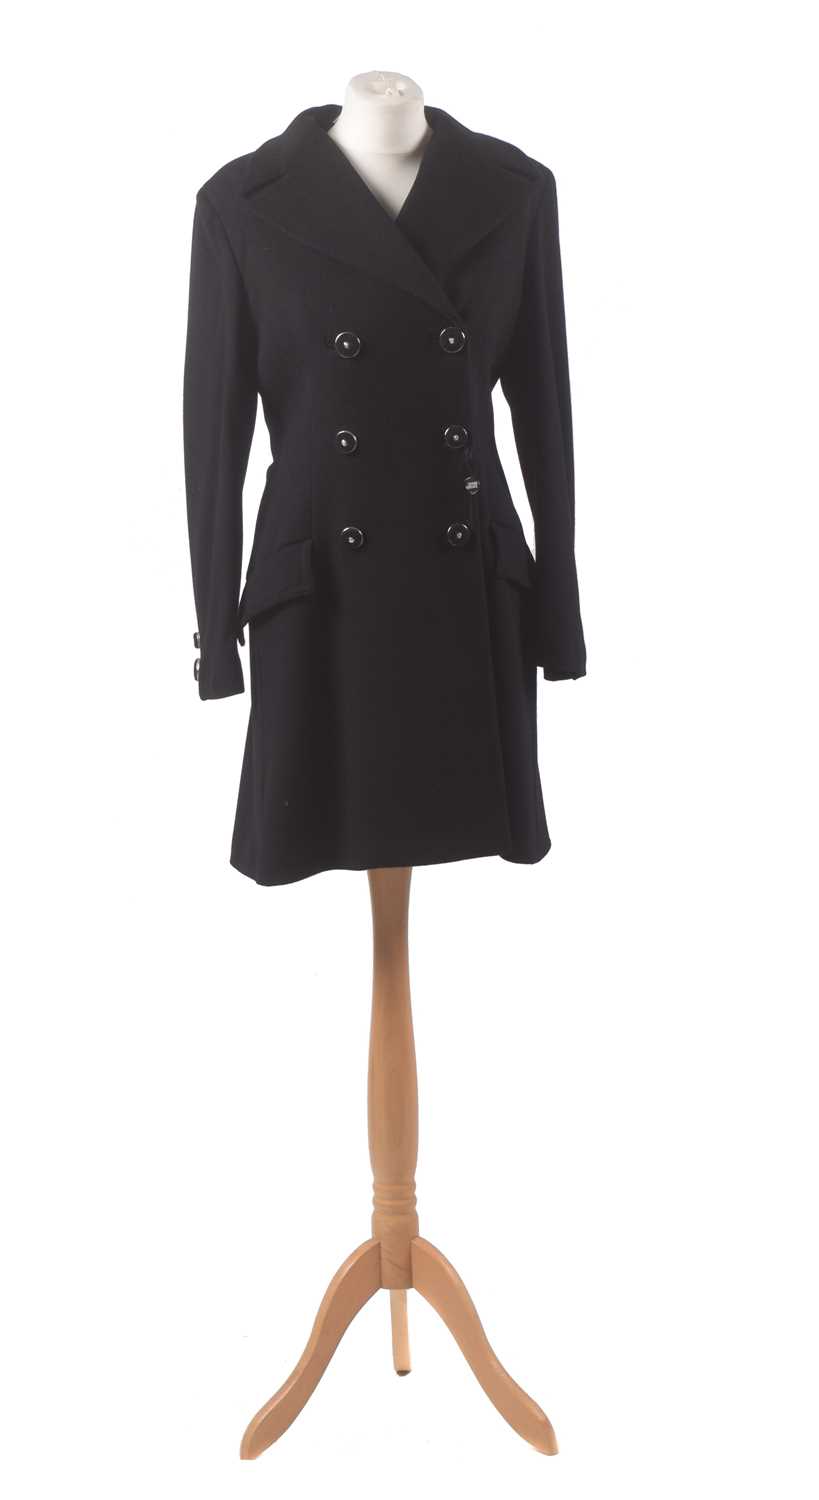 Lot 151 - A black wool coat by Gianni Versace Couture